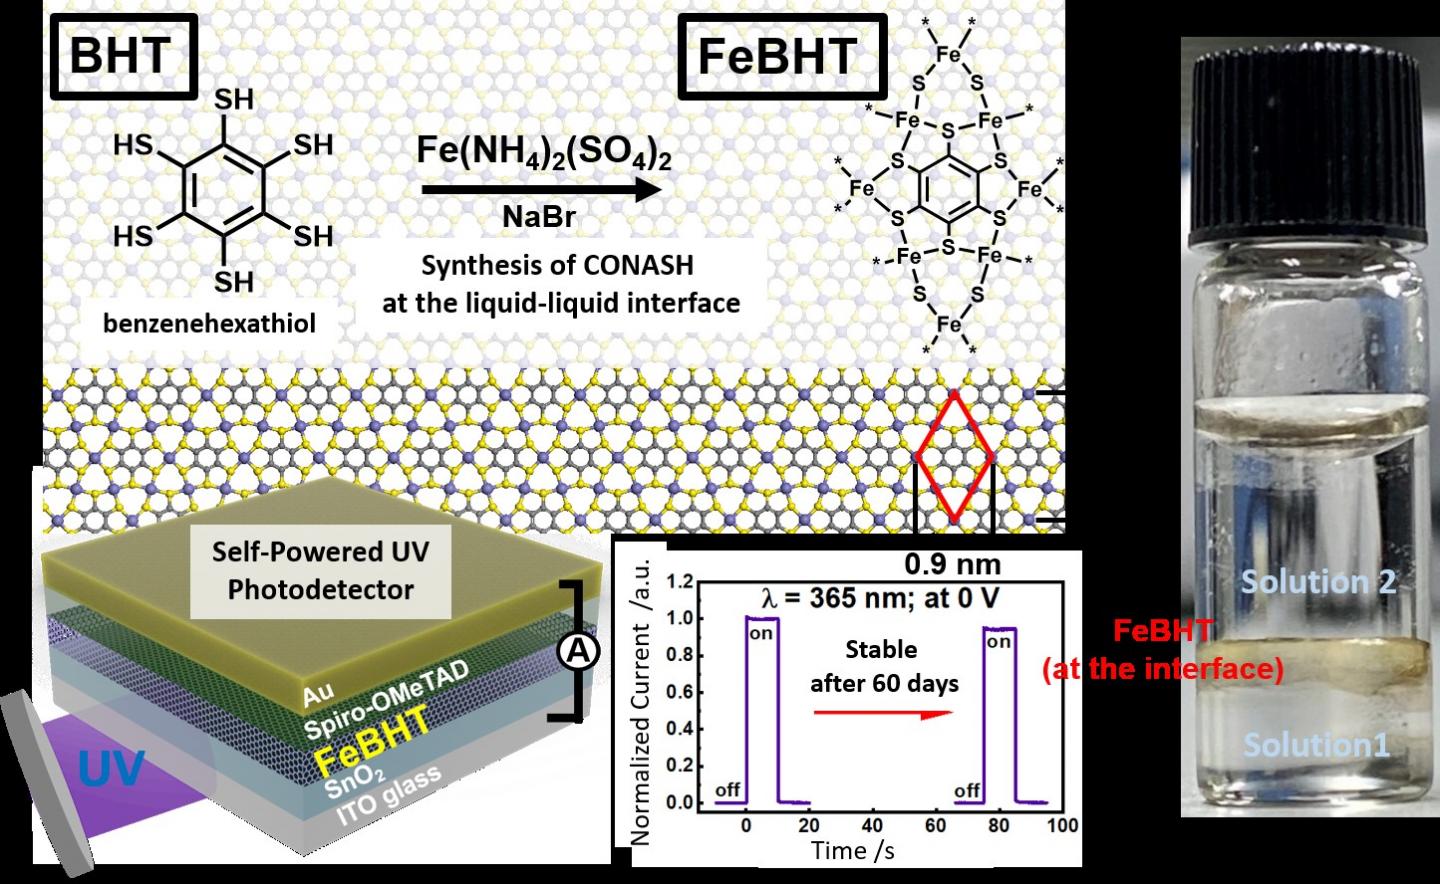 Formation of FeBHT complex-based CONASH at the liquid-liquid interface and its long-term stability as a photodetector.